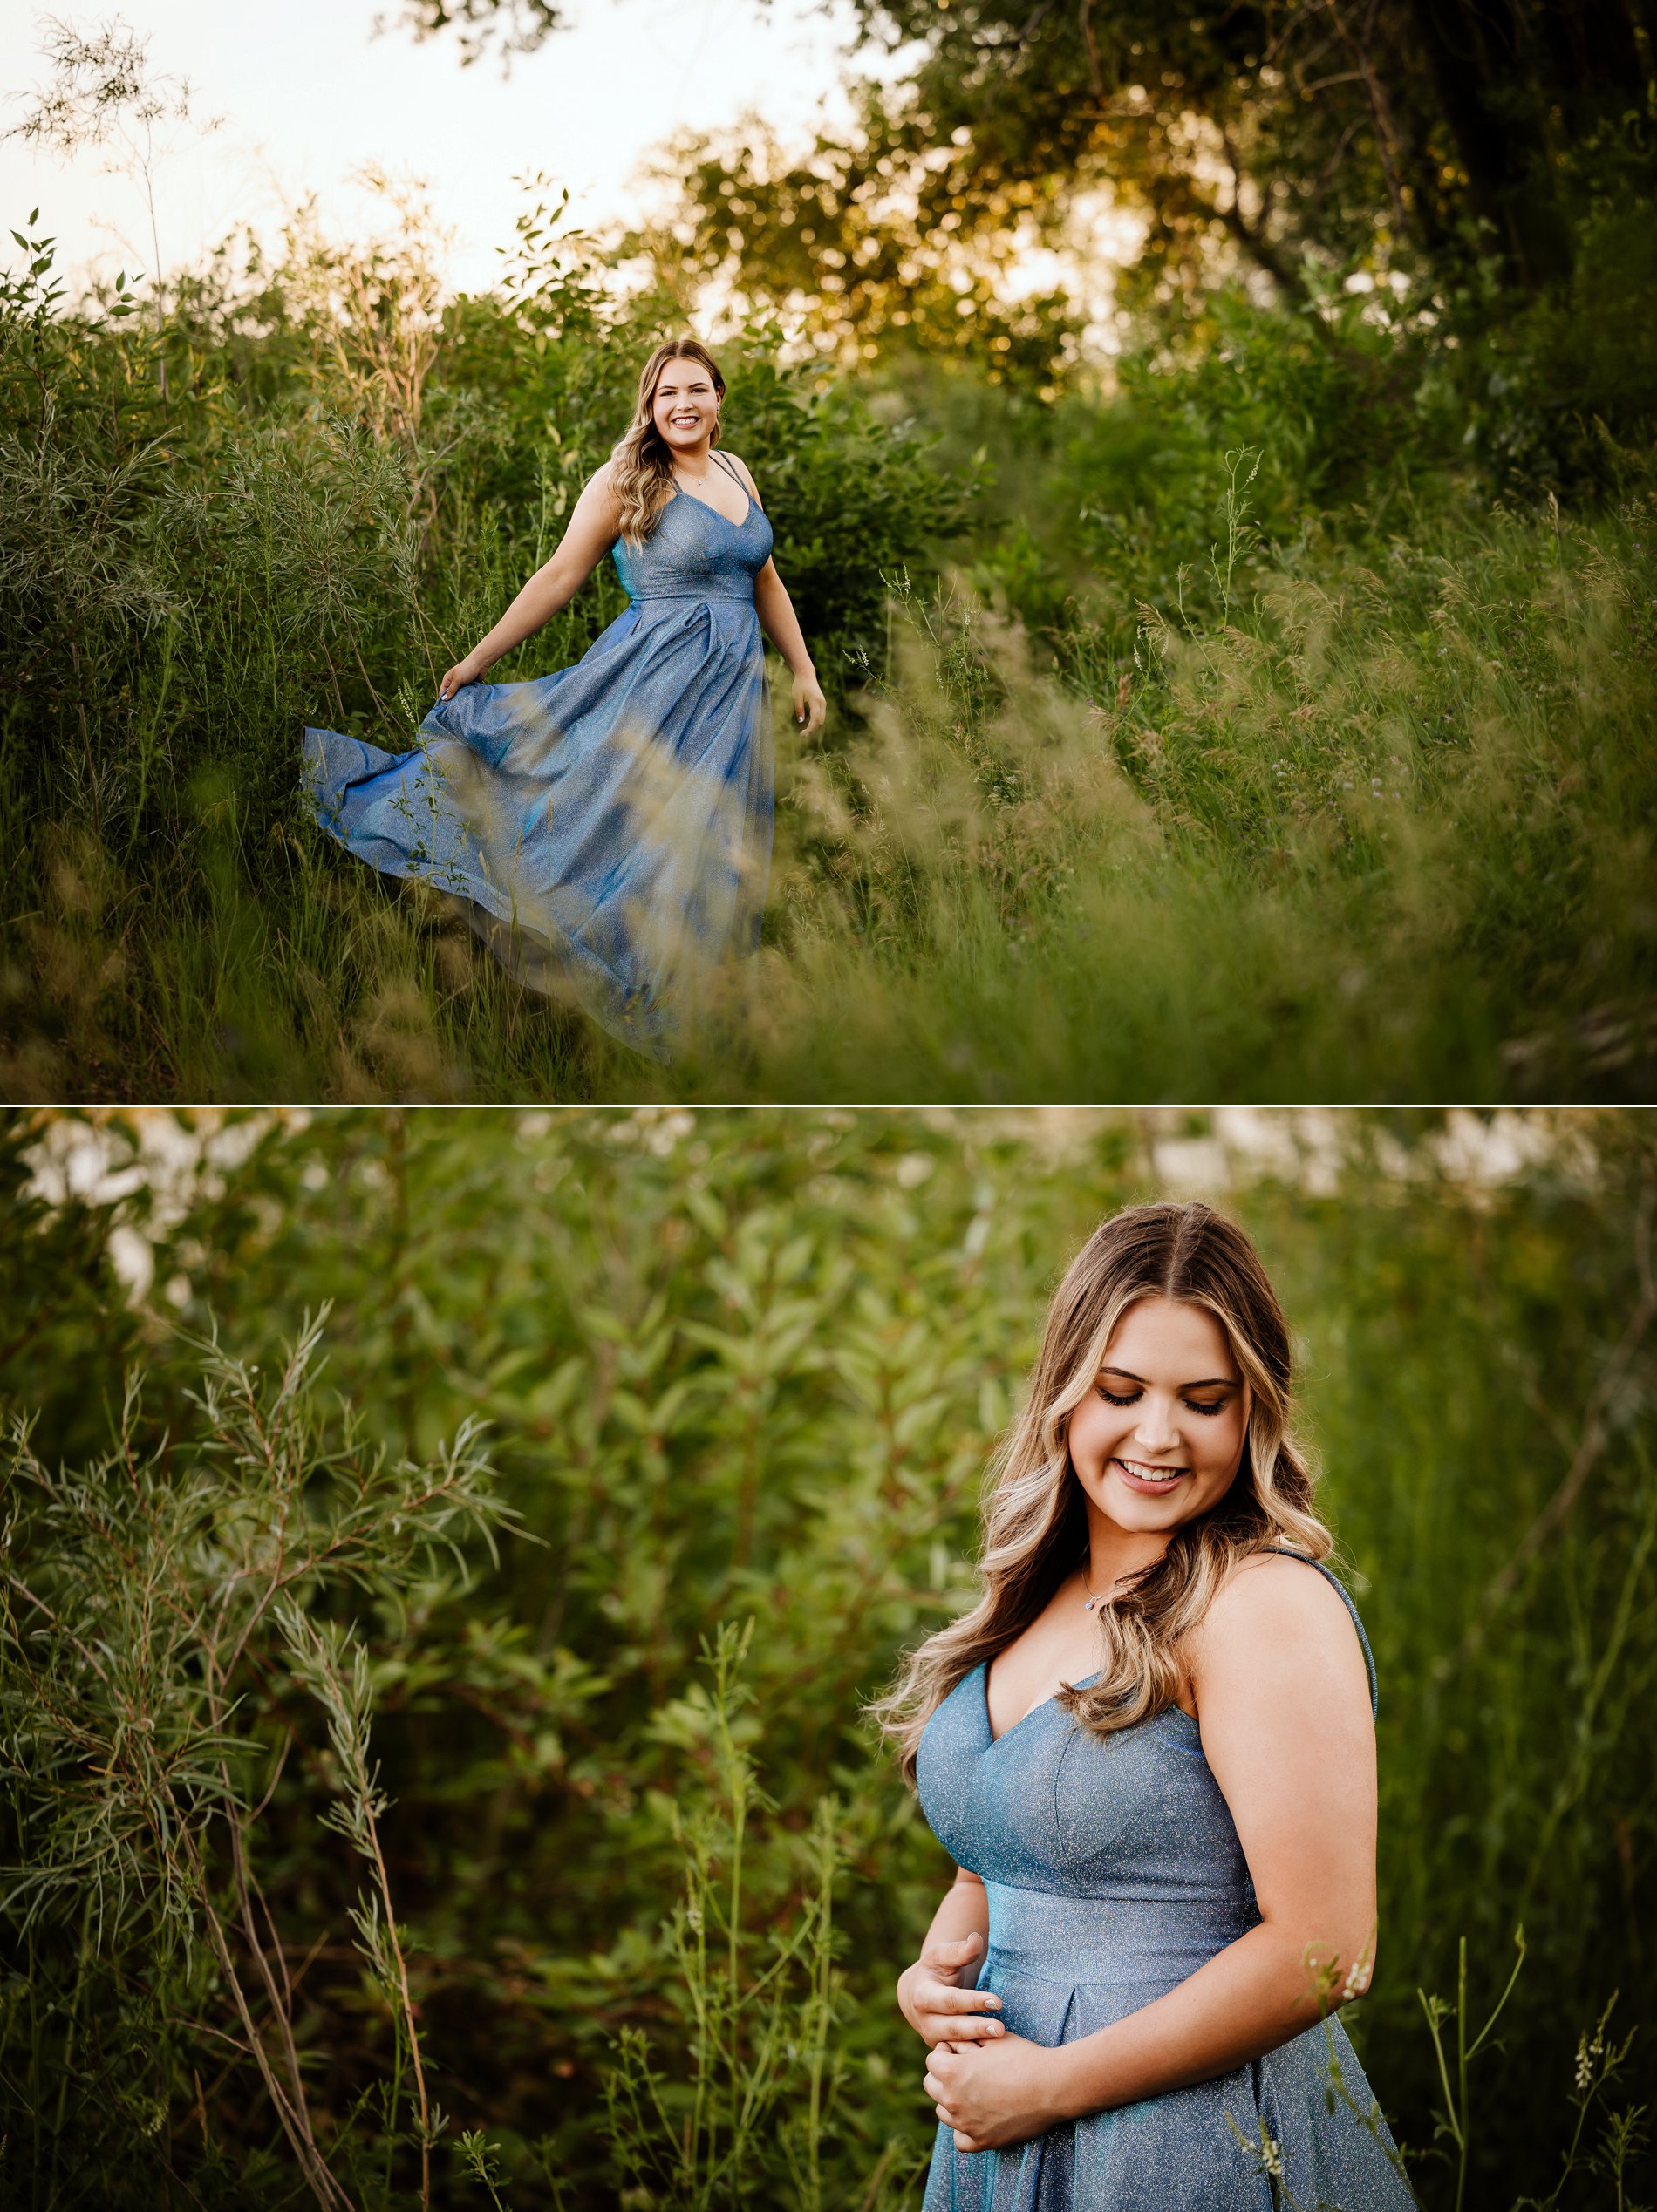 High school graduate poses for her photo session at golden hour in the forest near the river.